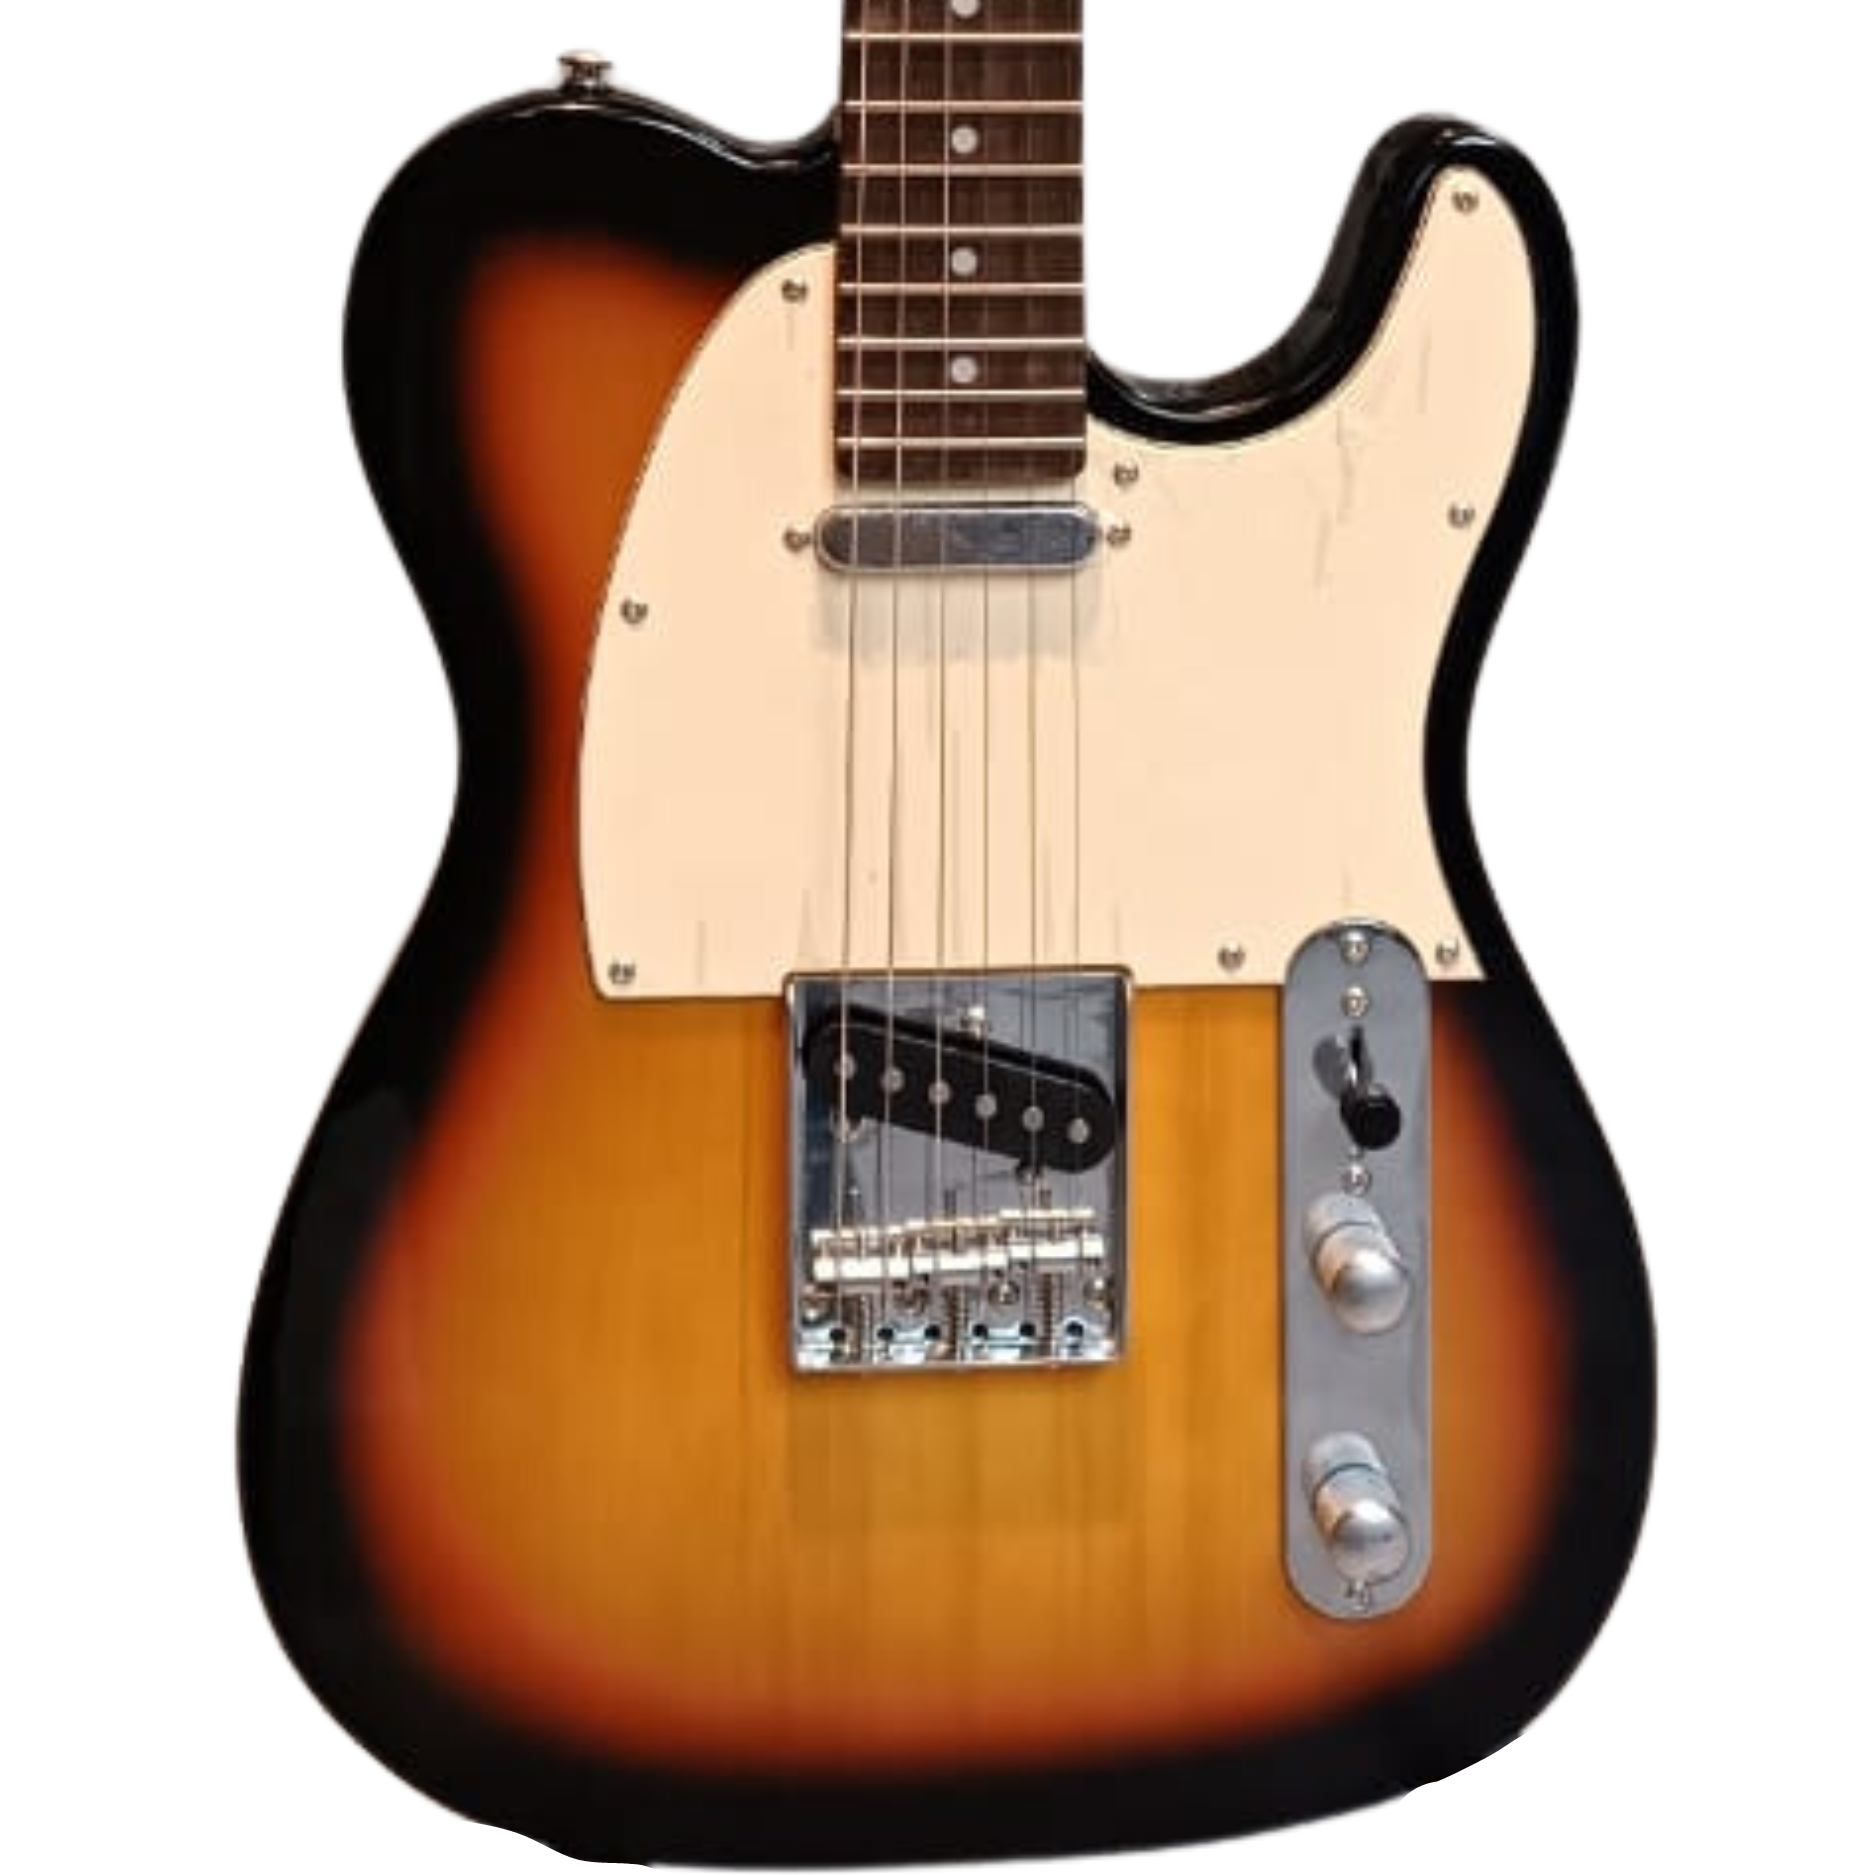 Classic Telecaster Electric Guitar with Single-Coil Pickups, Maple Neck, Alder Body, and Vintage Sunburst Finish.